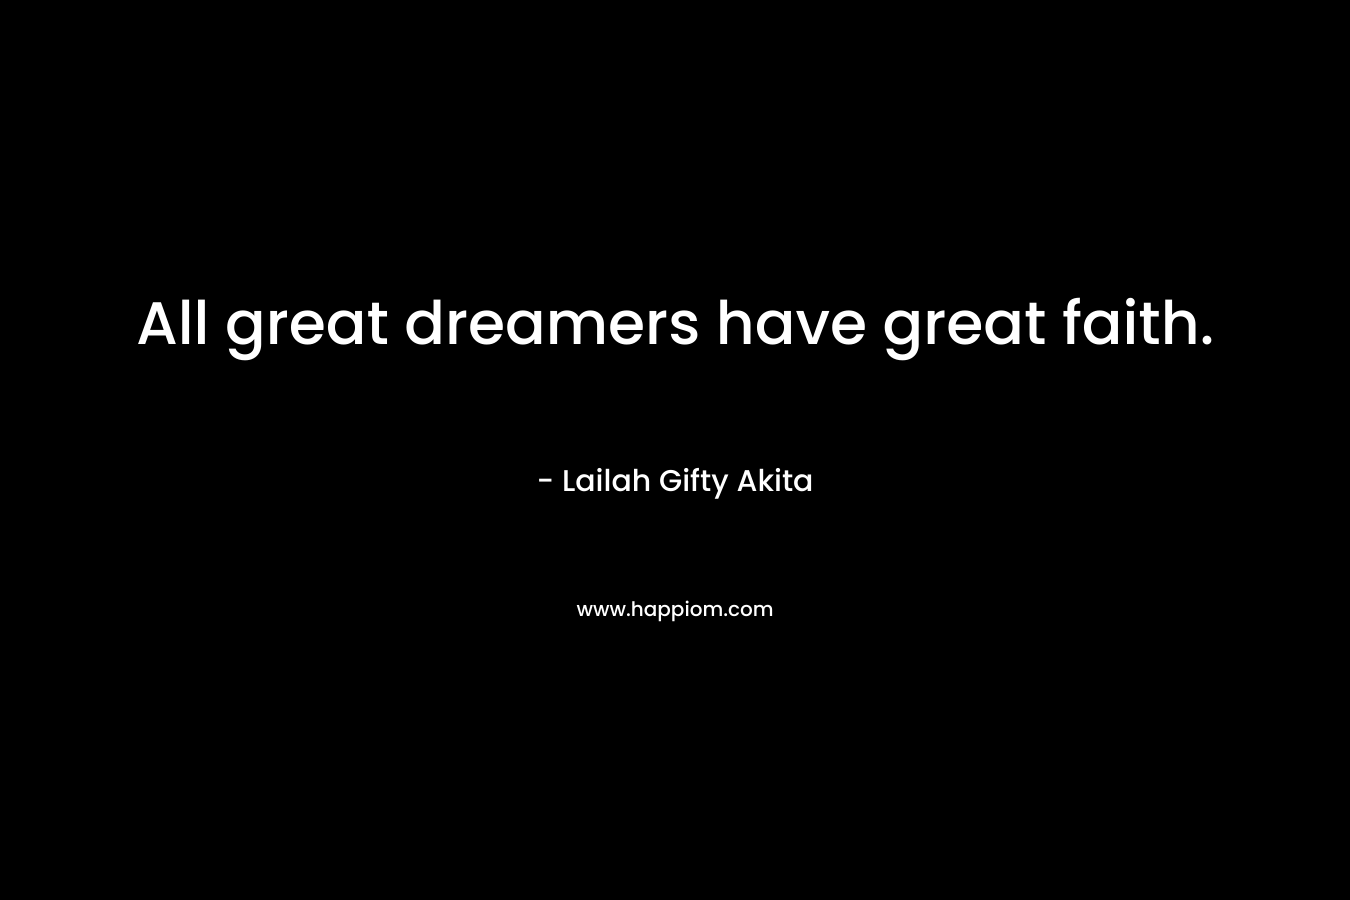 All great dreamers have great faith.